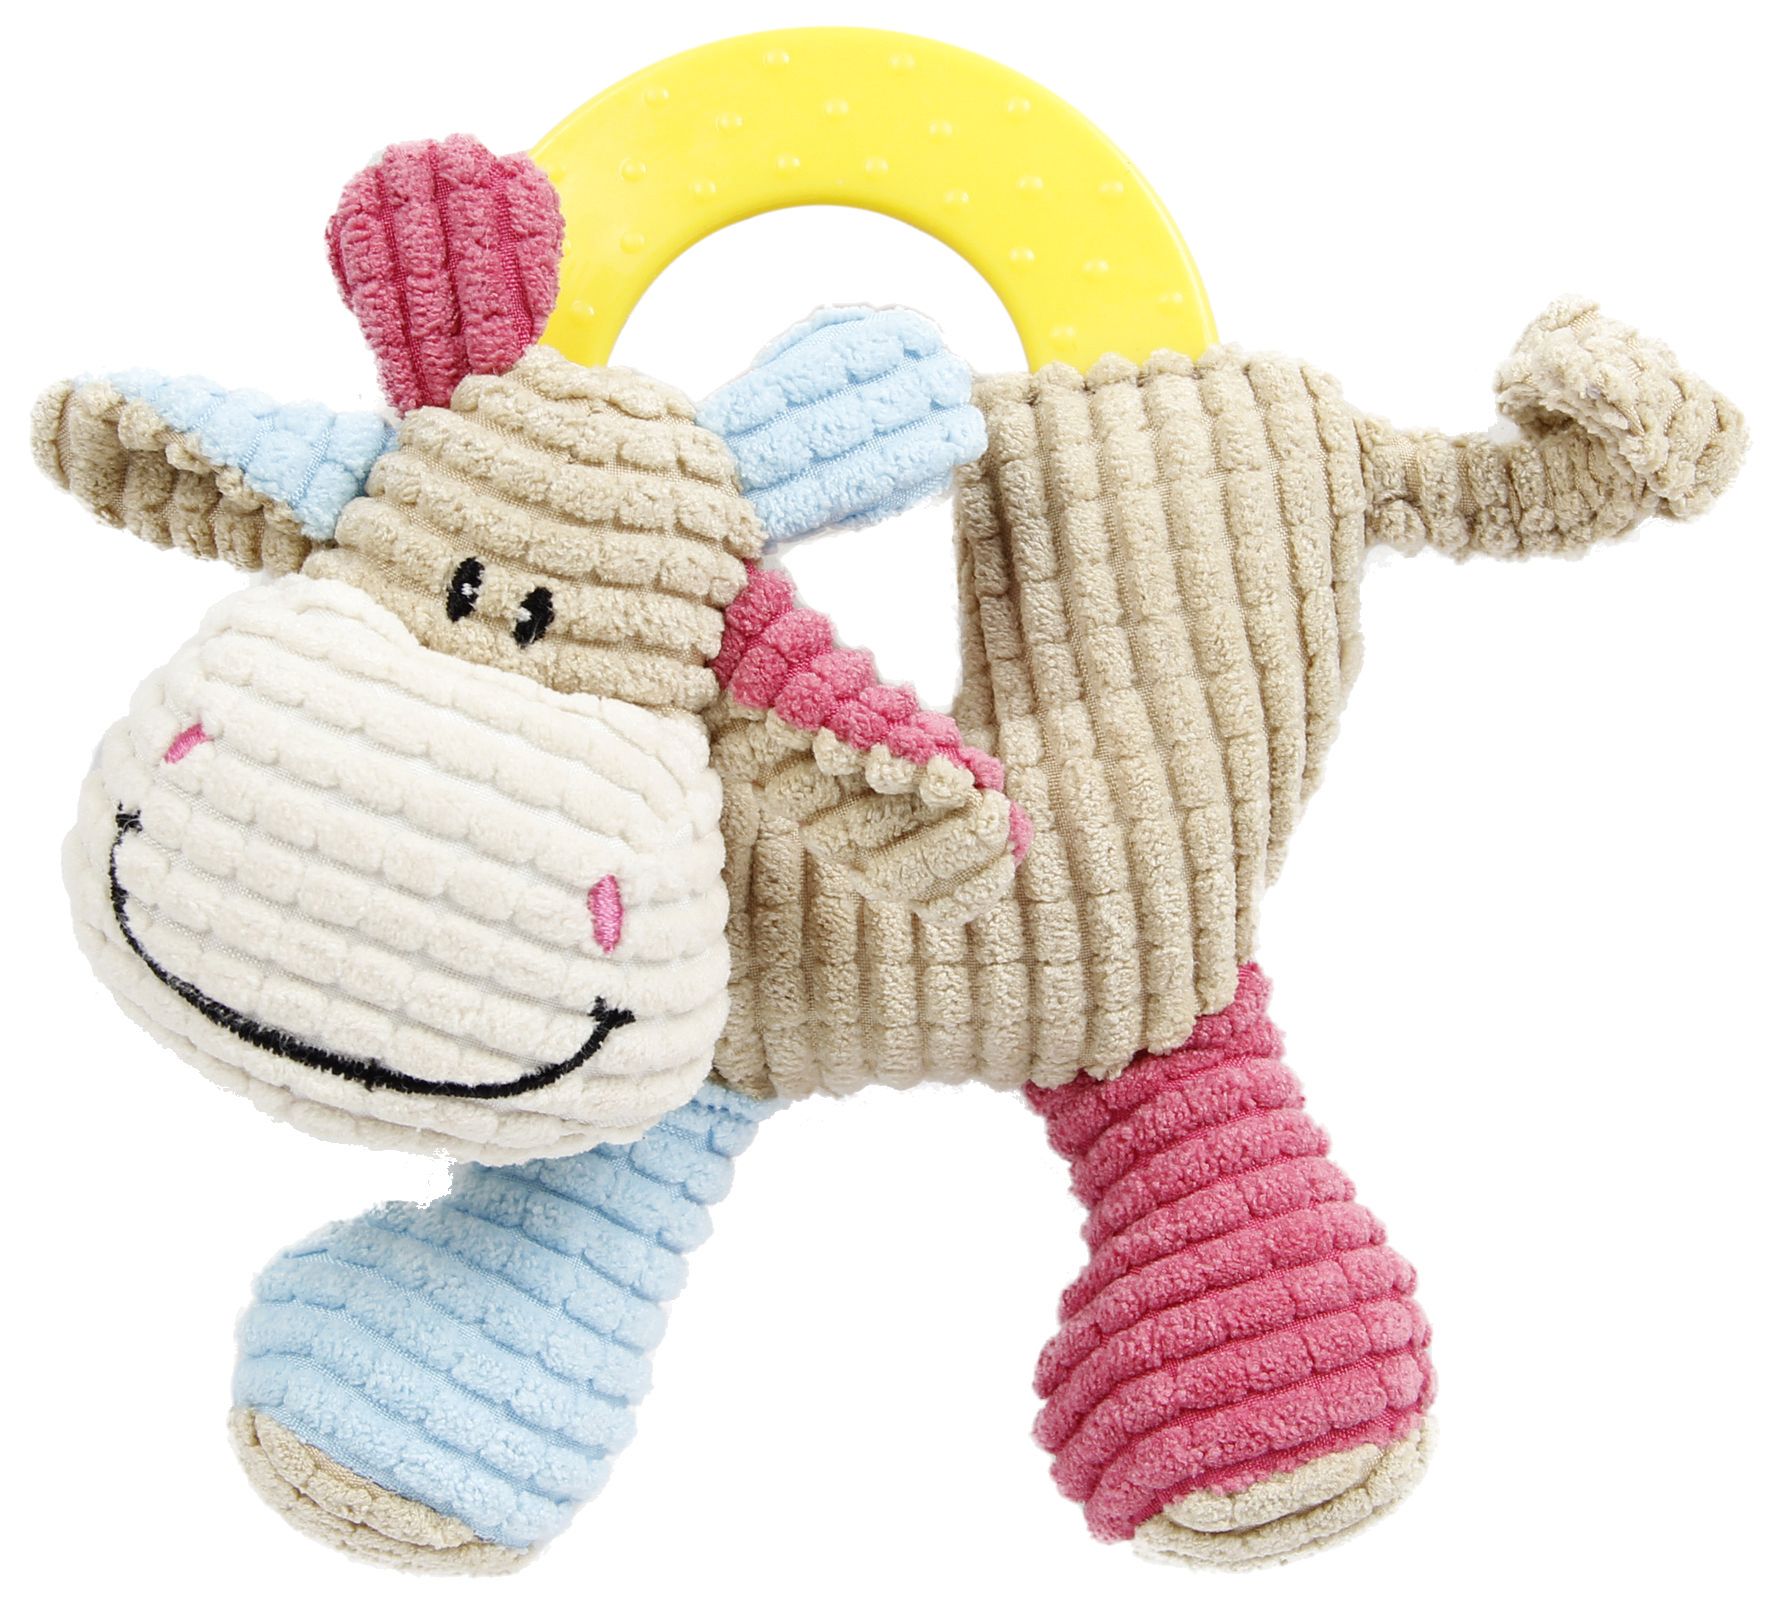 Pet Life ® 'Moo-cifier' Plush Squeaking and Rubber Teething Newborn Puppy Dog Toy Brown, Blue, Pink 